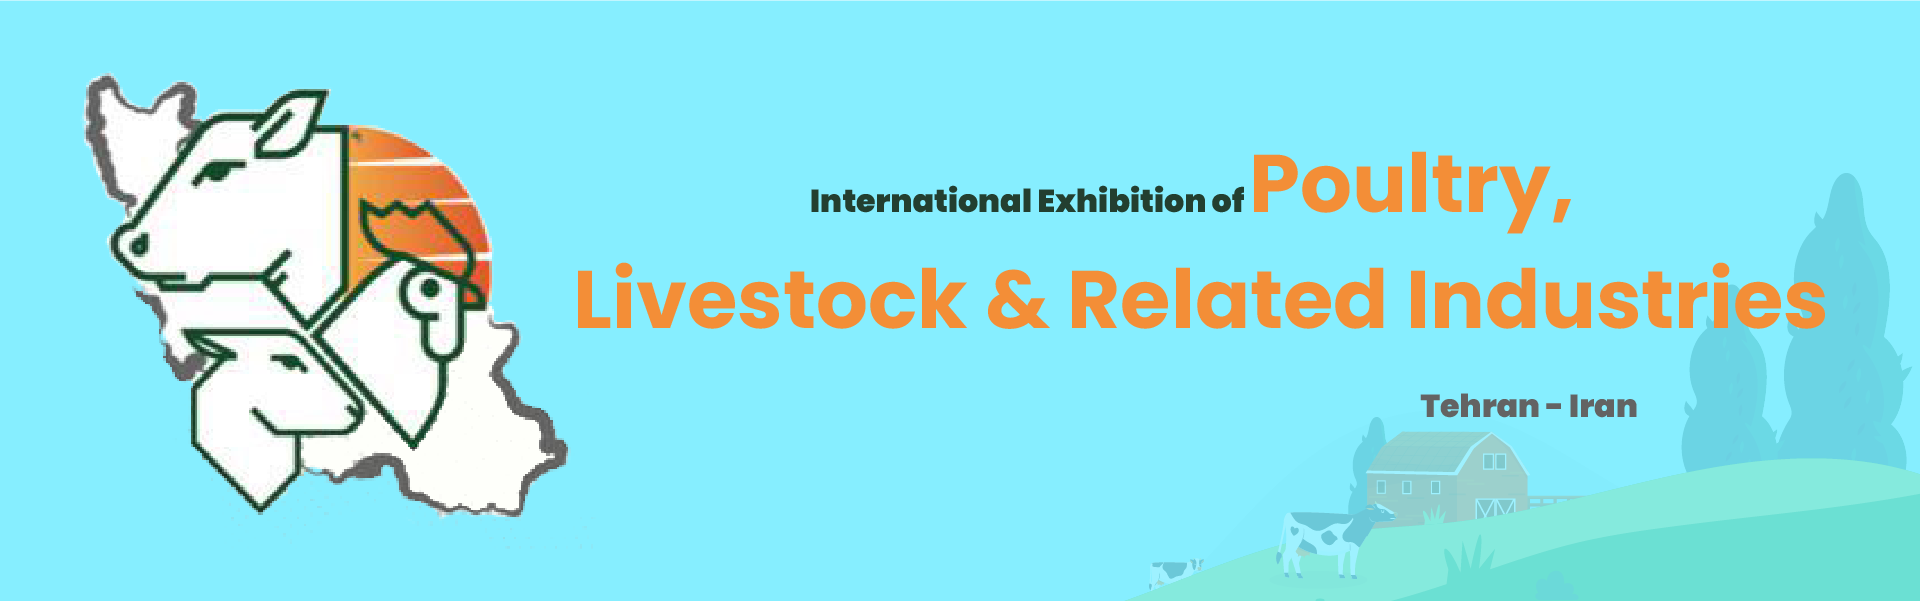 Tehran International Exhibition of Livestock Poultry and Related Industries